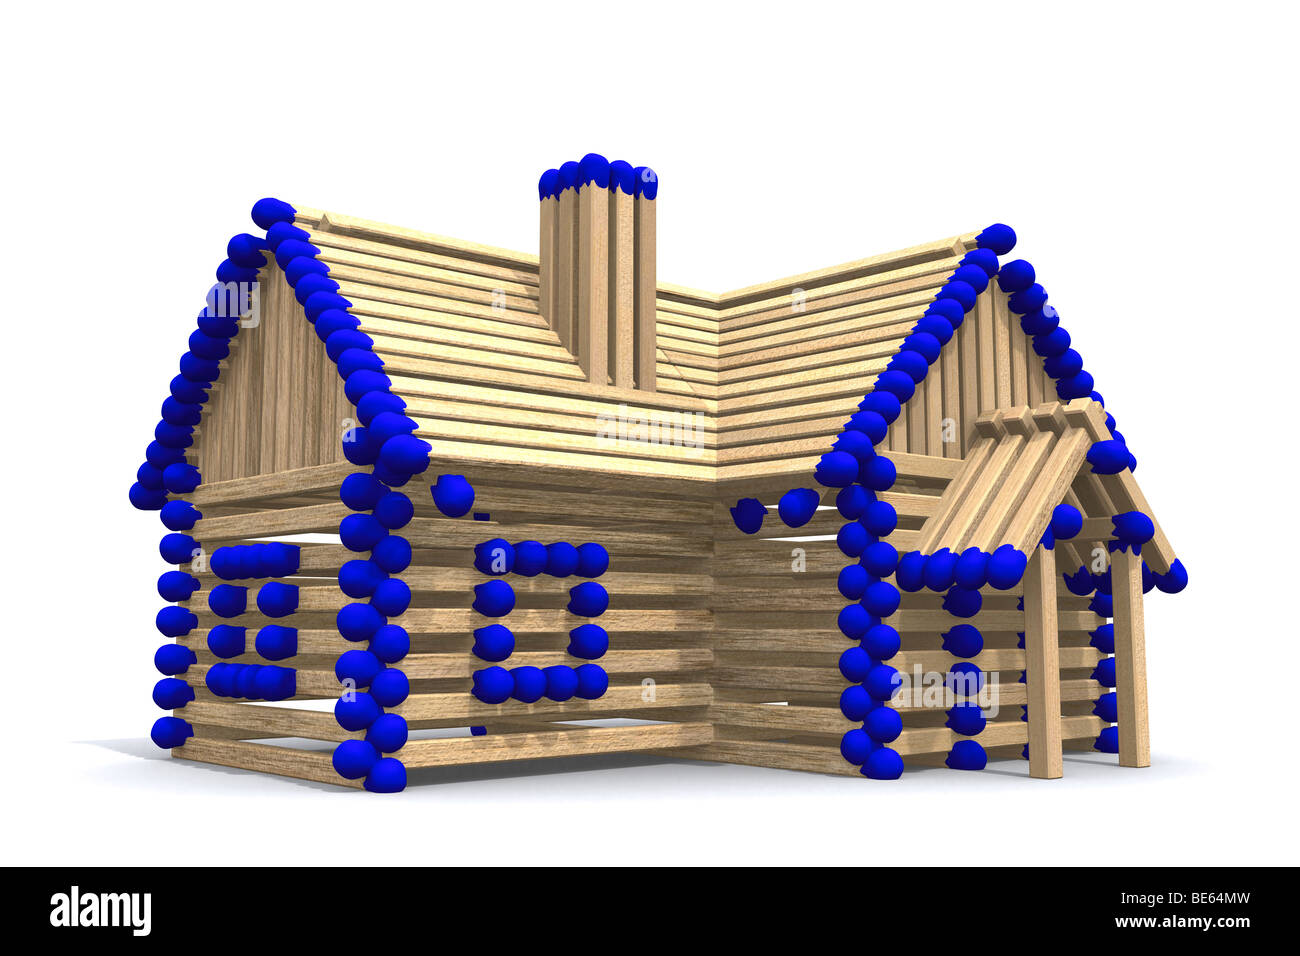 House from matches Stock Photo